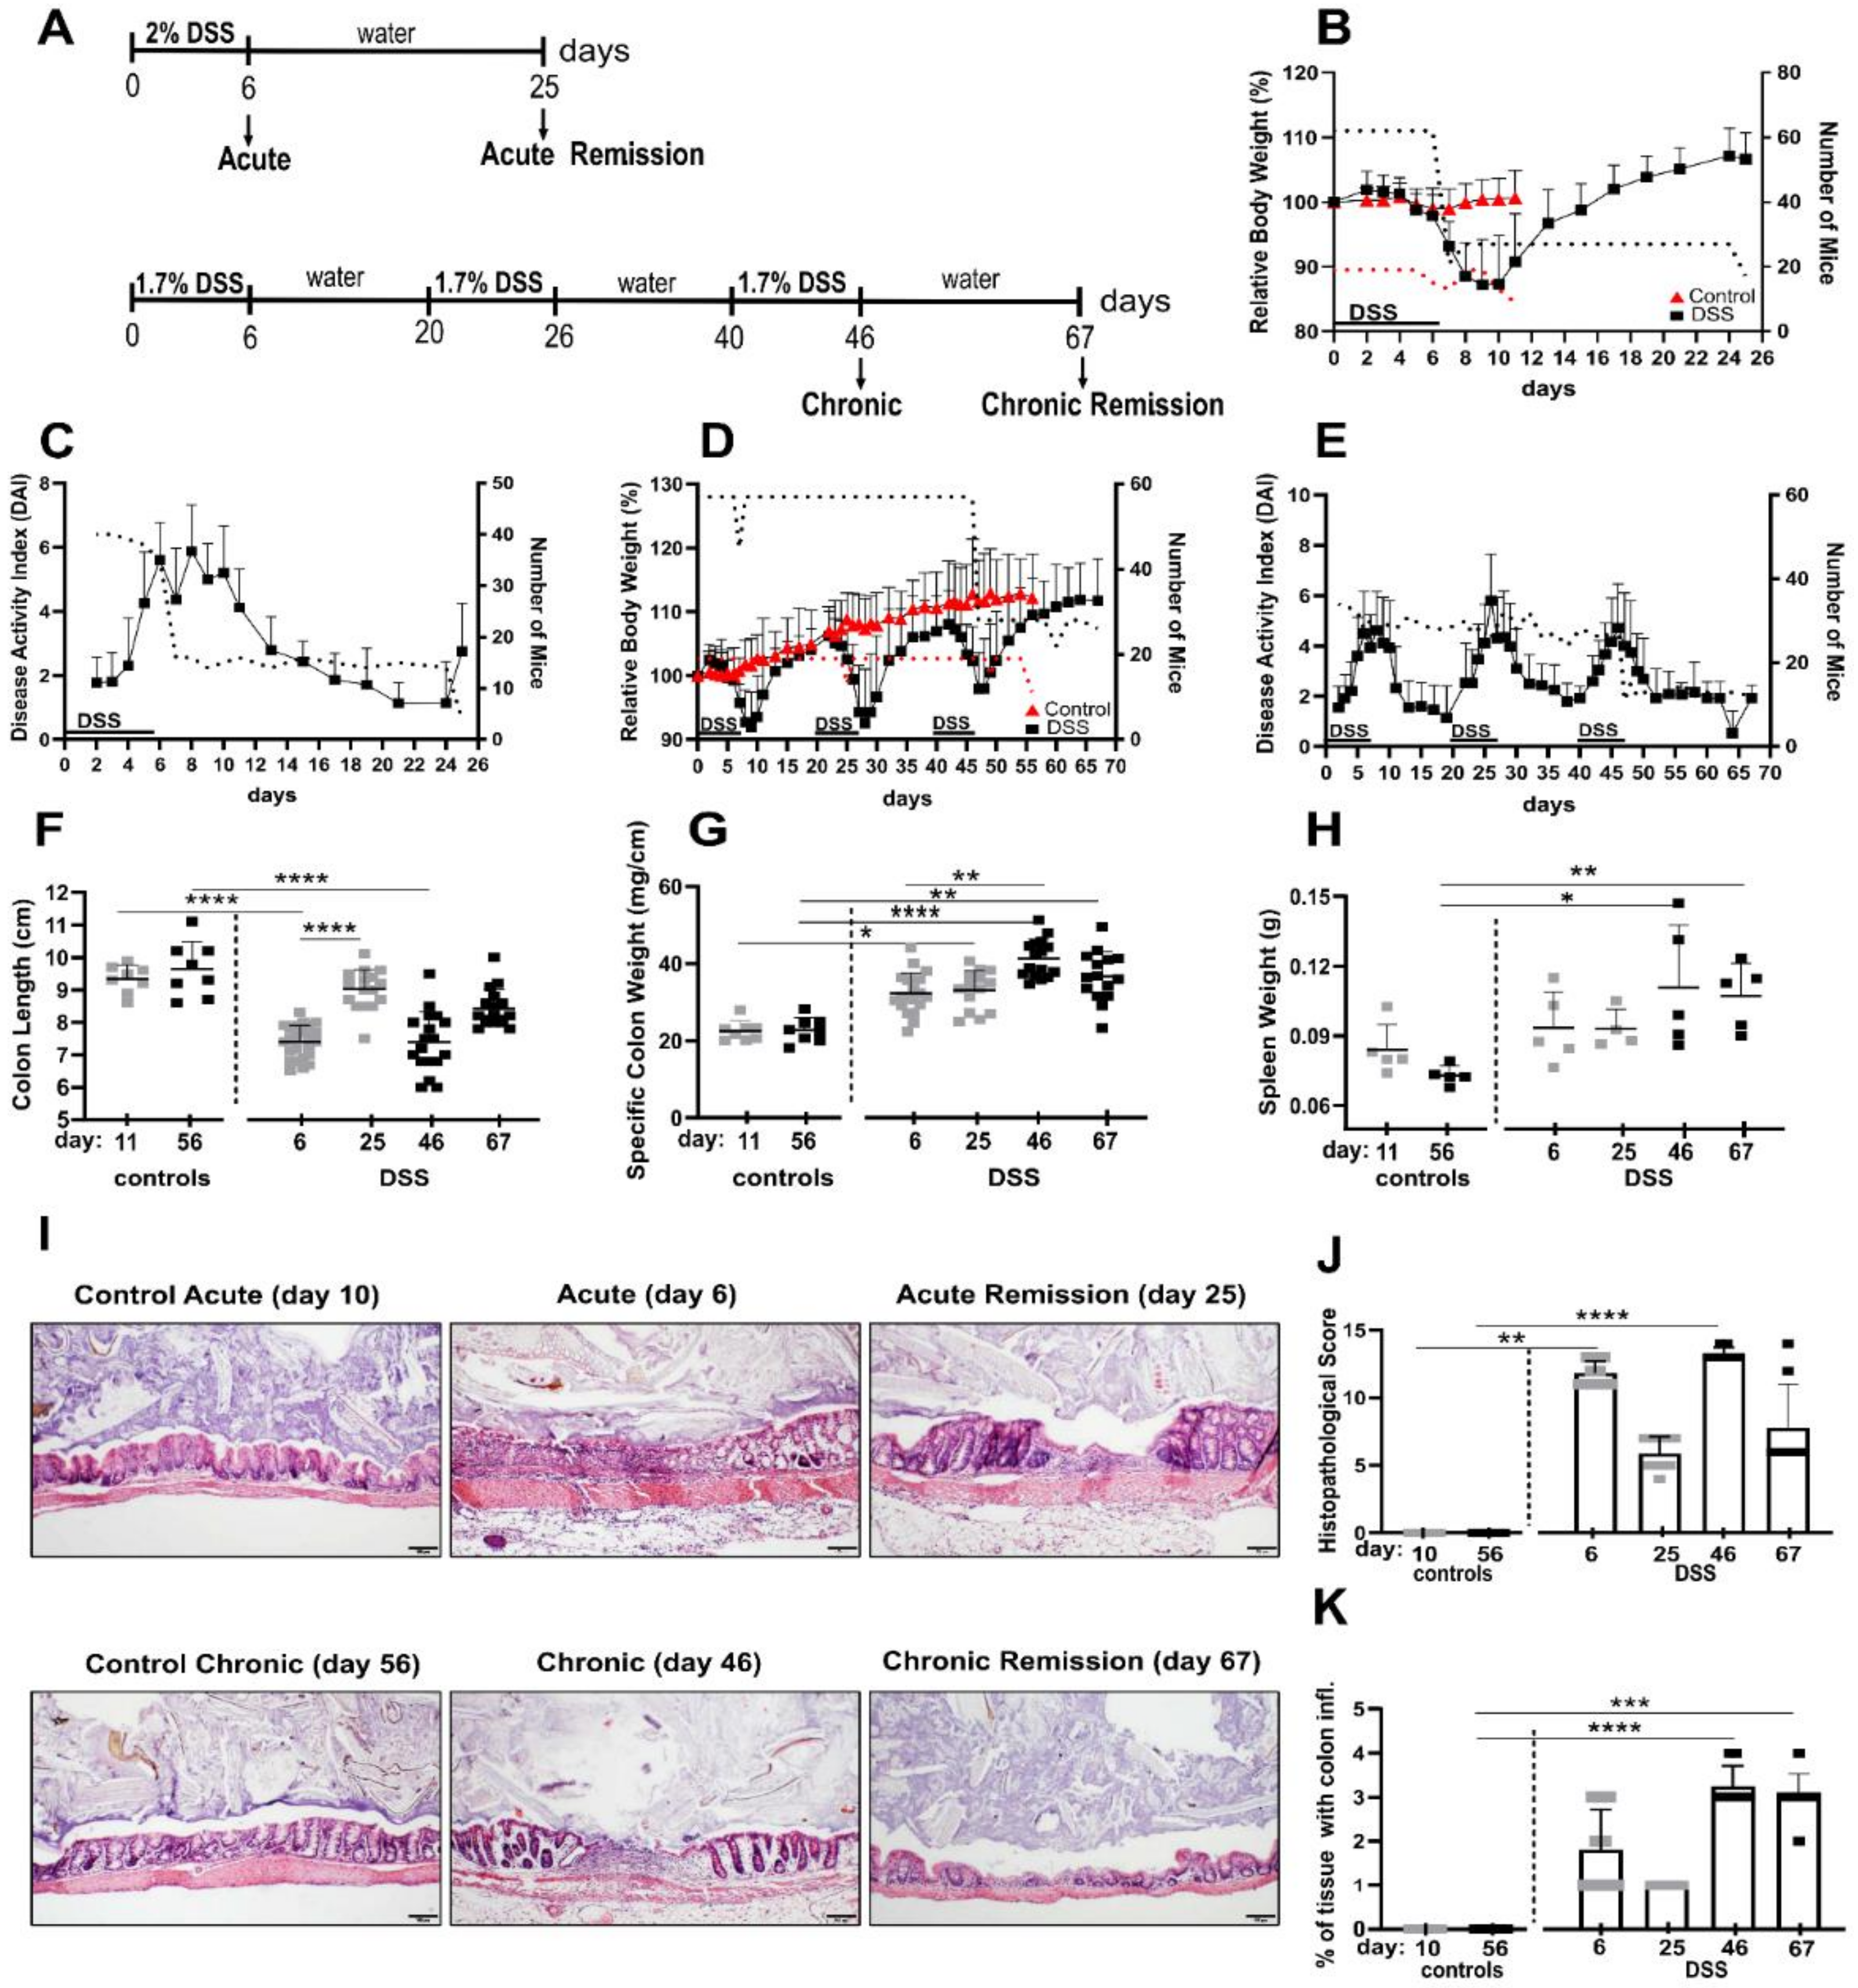 Biomedicines | Free Full-Text | Characterization of Maladaptive Processes  in Acute, Chronic and Remission Phases of Experimental Colitis in C57BL/6  Mice